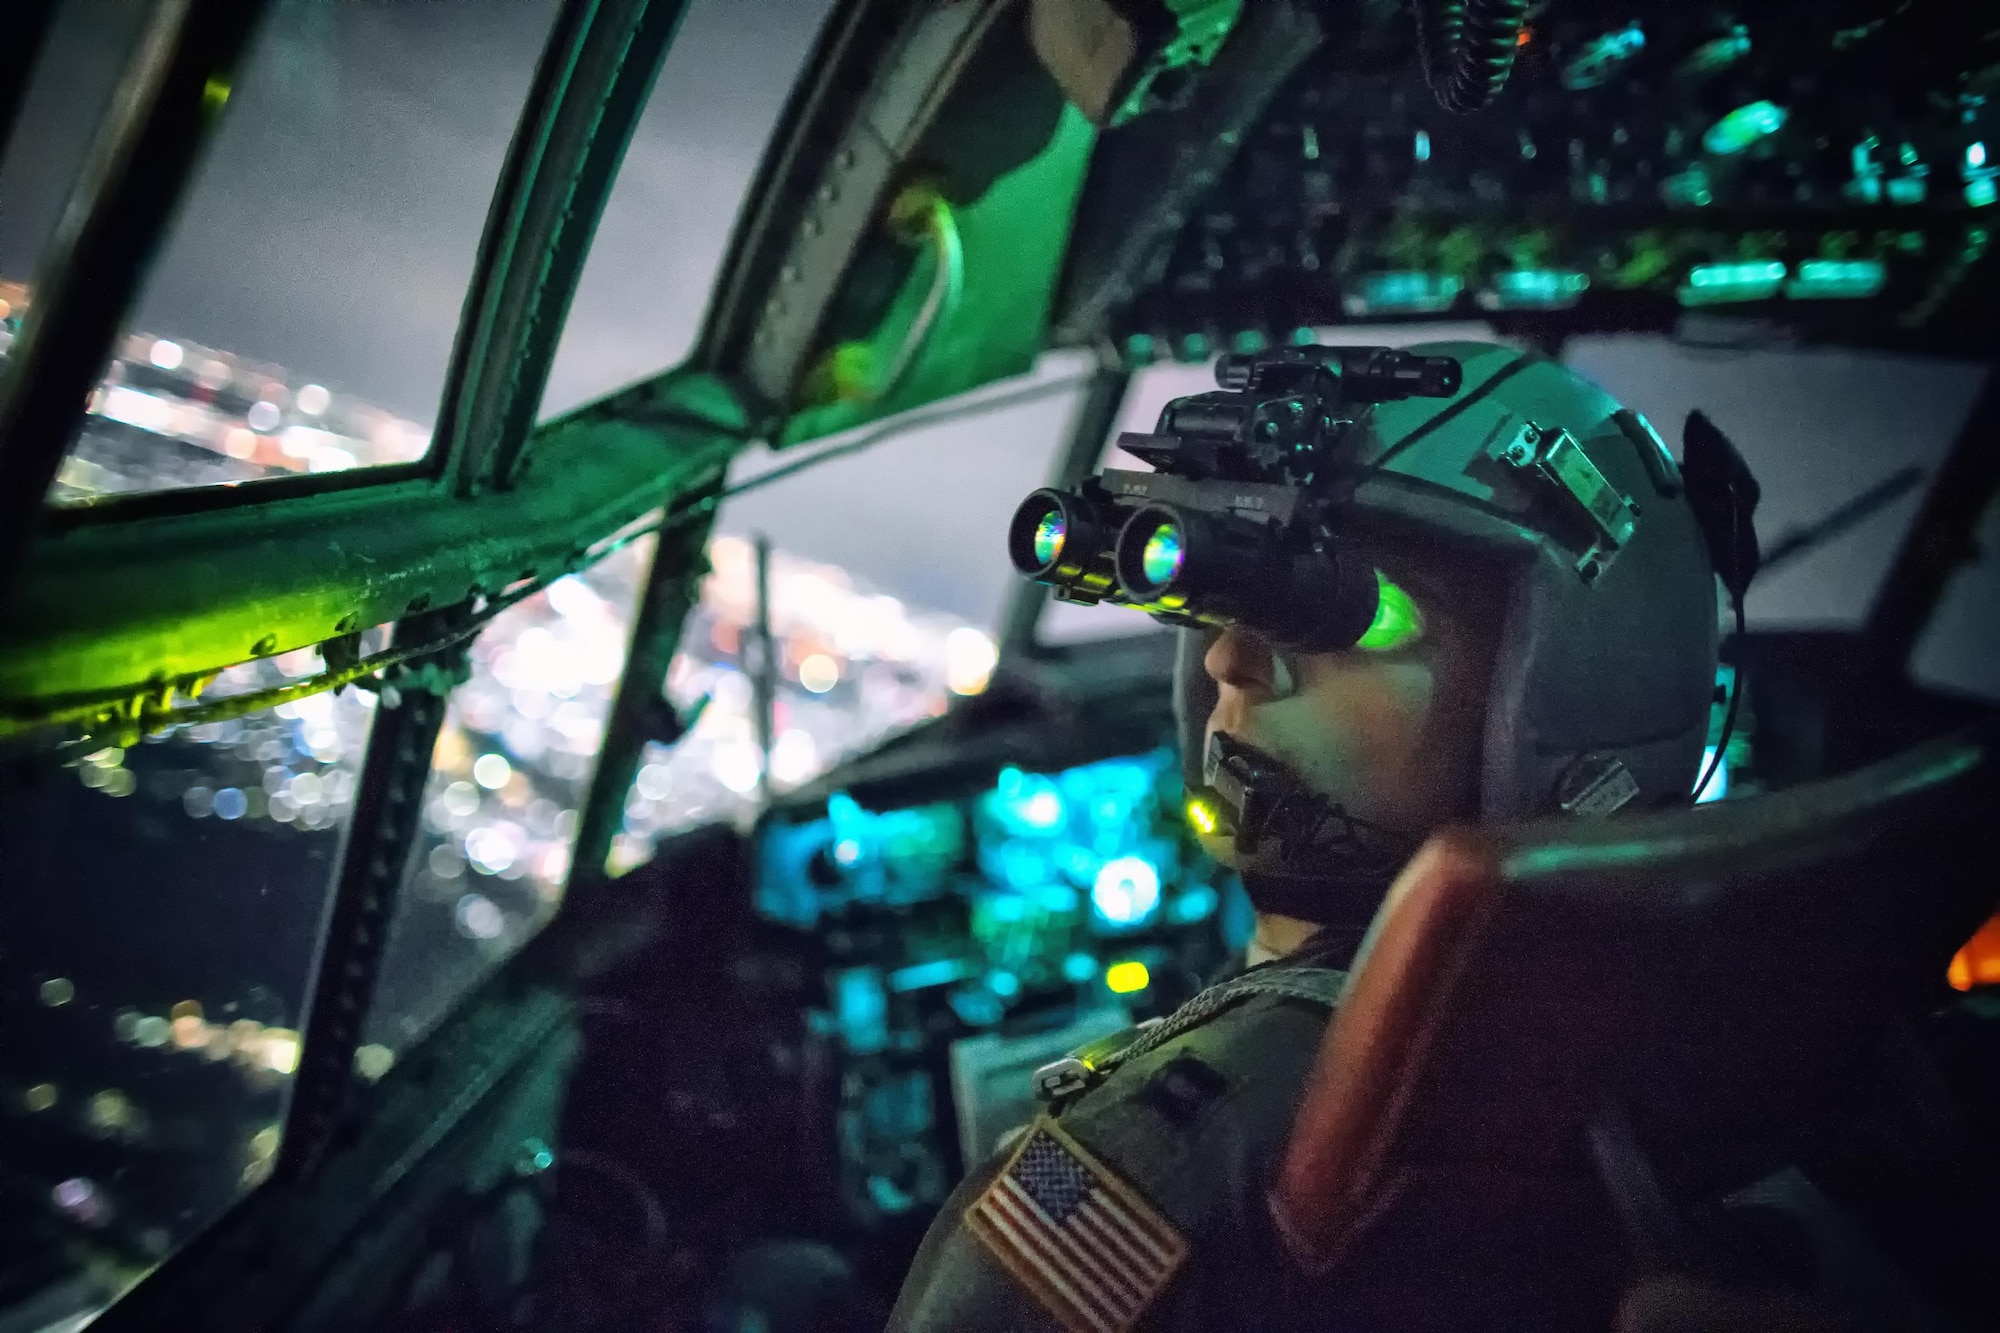 Capt. Thomas Bernard, a 36th Airlift Squadron C-130 Hercules pilot, performs a visual confirmation with night vision goggles during a training mission over Kanto Plain, Japan, Oct. 14, 2015. Yokota Air Base aircrews regularly conduct night flying operations to ensure they’re prepared to respond to a variety of contingencies throughout the Indo-Asia-Pacific region. (U.S. Air Force photo/Osakabe Yasuo)